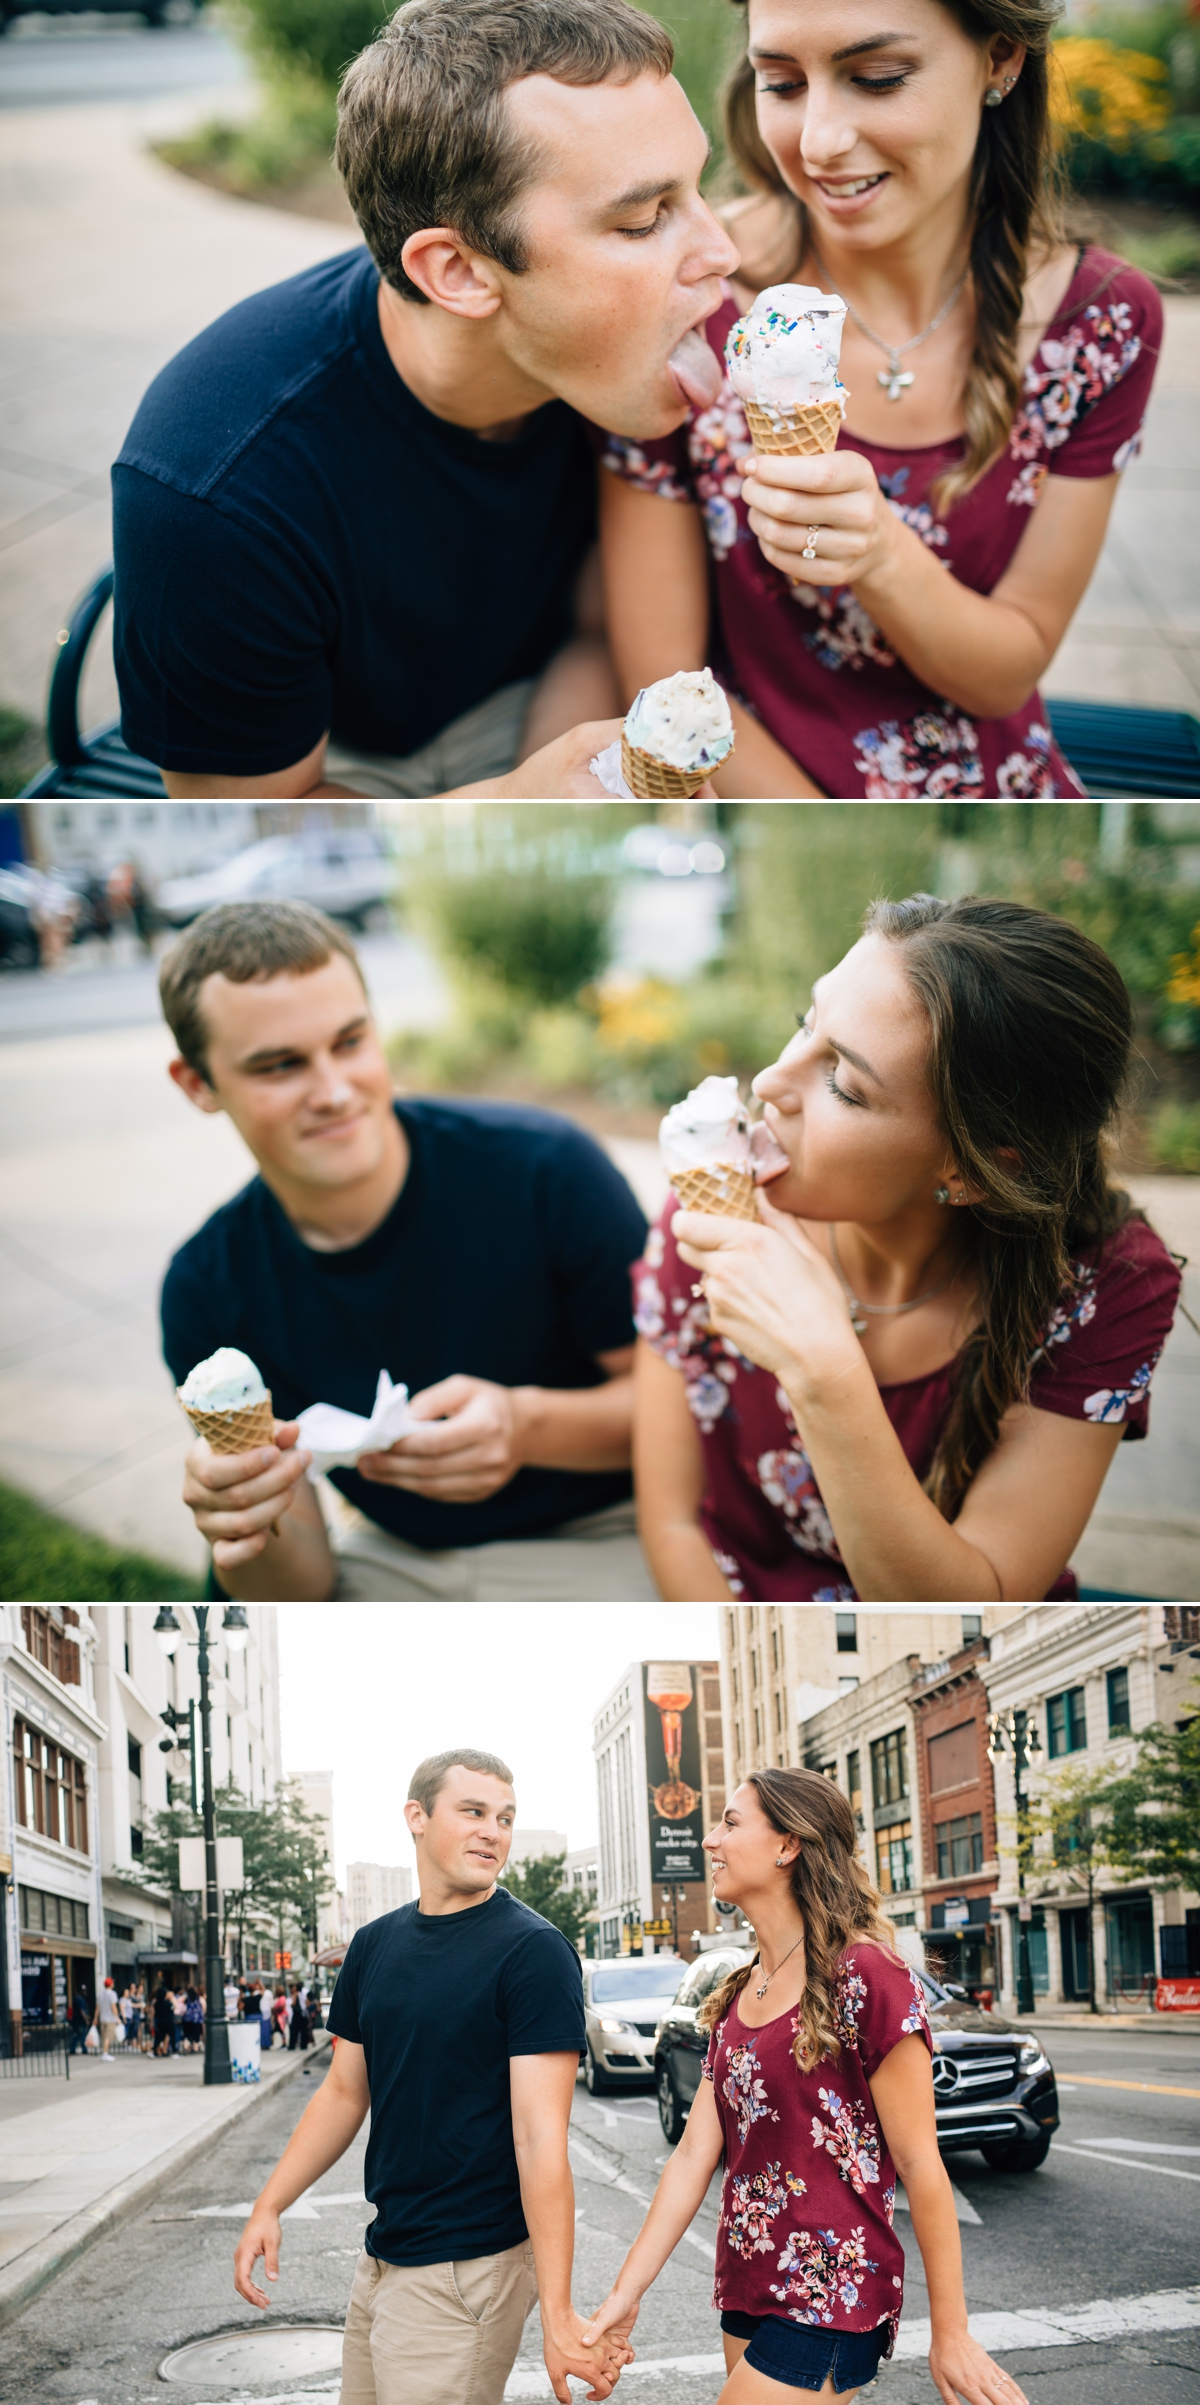 Man and Woman eating ice cream during engagement session in Greektown